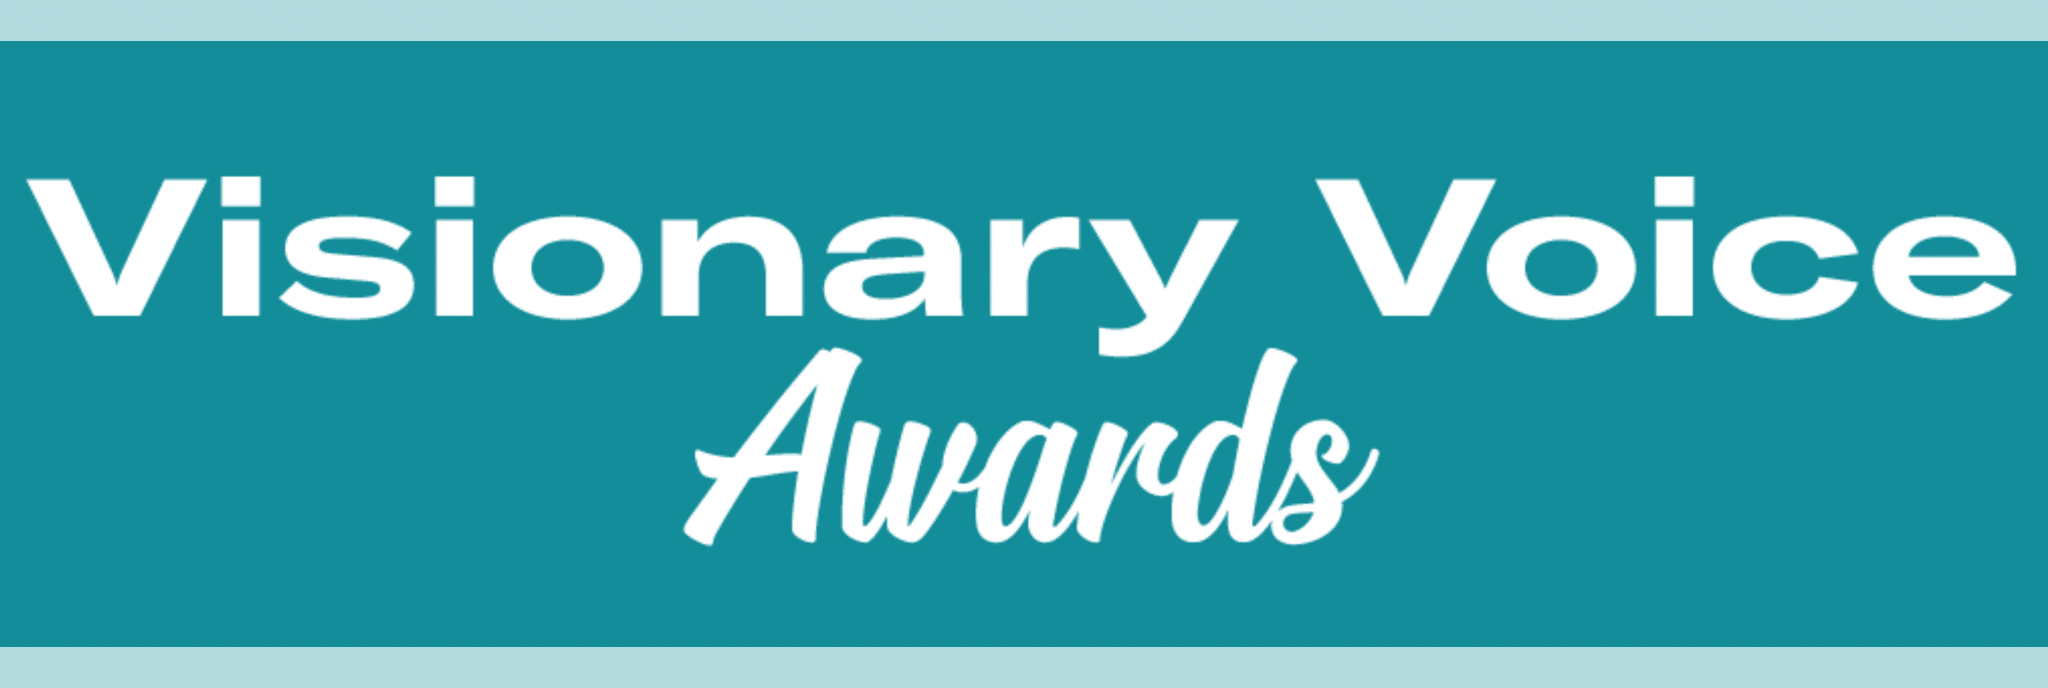 A teal background has white text reading "Visionary Voice Awards"